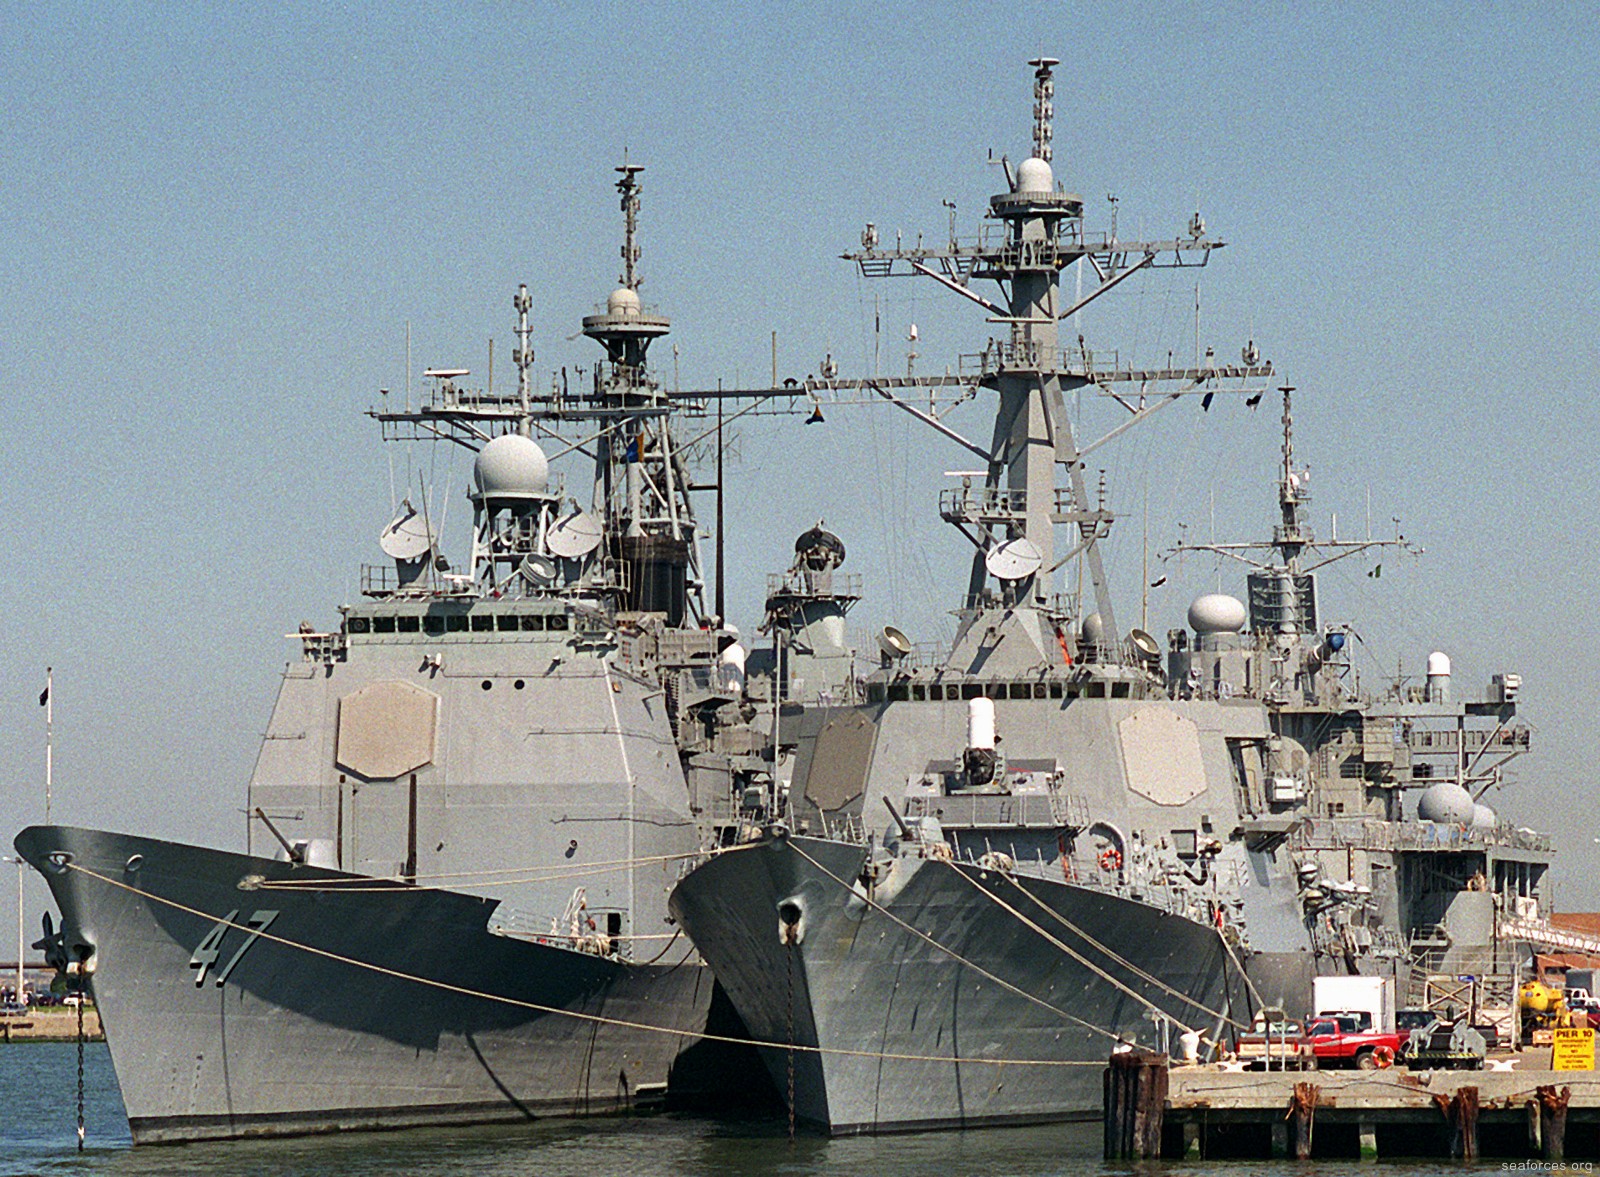 ddg-58 uss laboon guided missile destroyer us navy 82 aegis